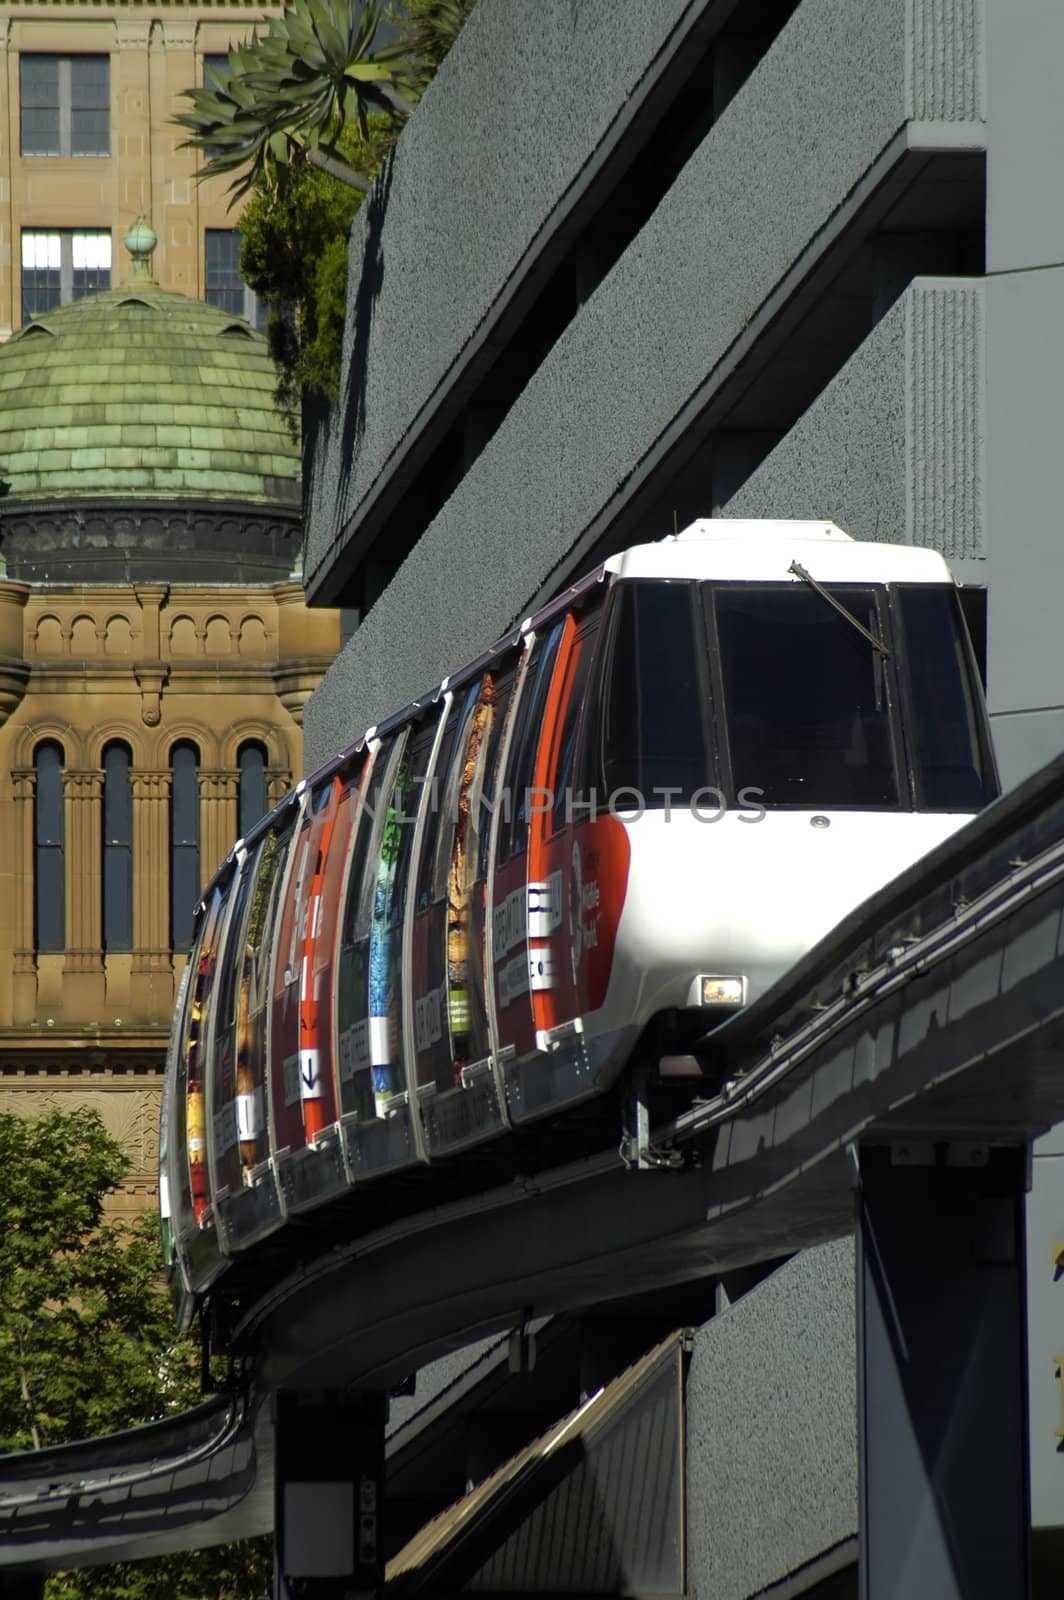 sydney monorail, train on single rail, buildings in background, telephoto